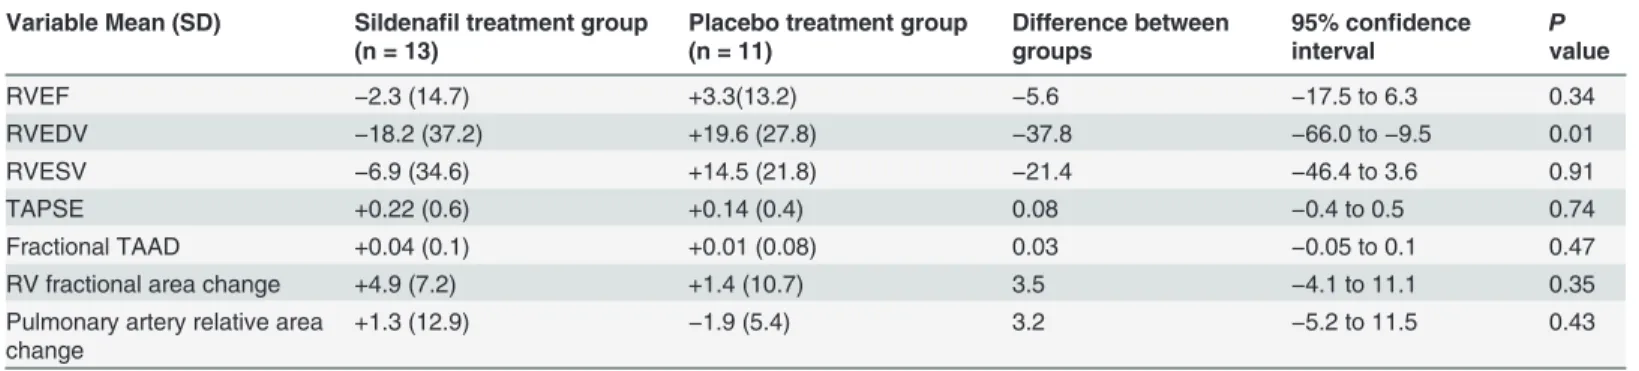 Table 4. Absolute right ventricle parameters changes before and after the sildenaﬁl and placebo Variable Mean (SD) Sildenaﬁl treatment group